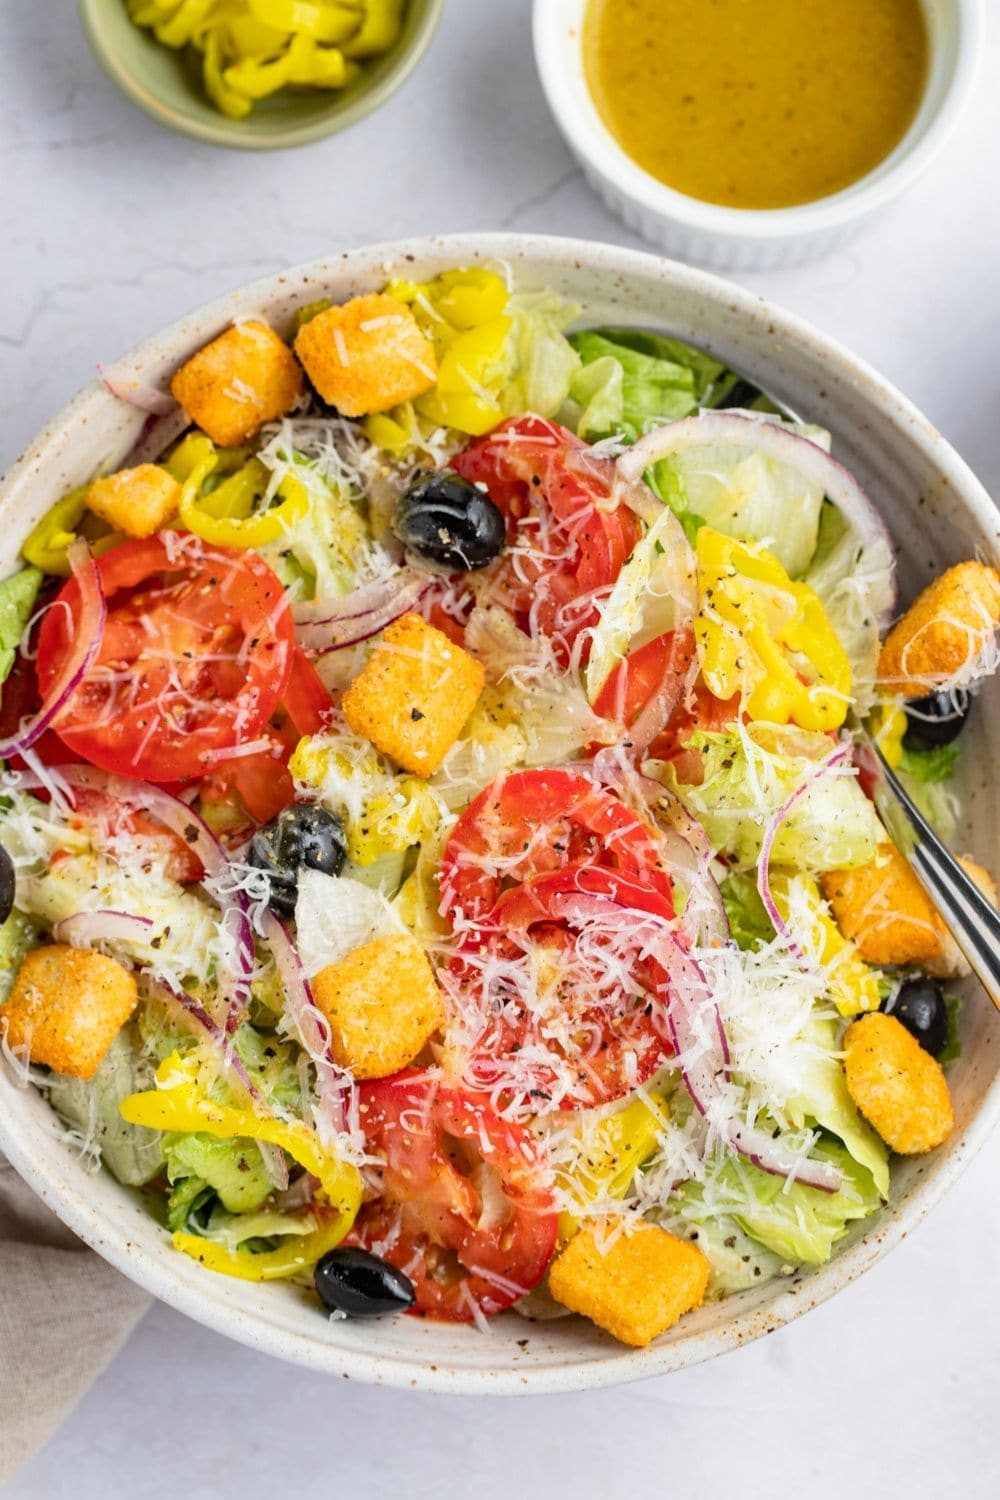 Homemade Olive Garden Salad in a Bowl with Dressing